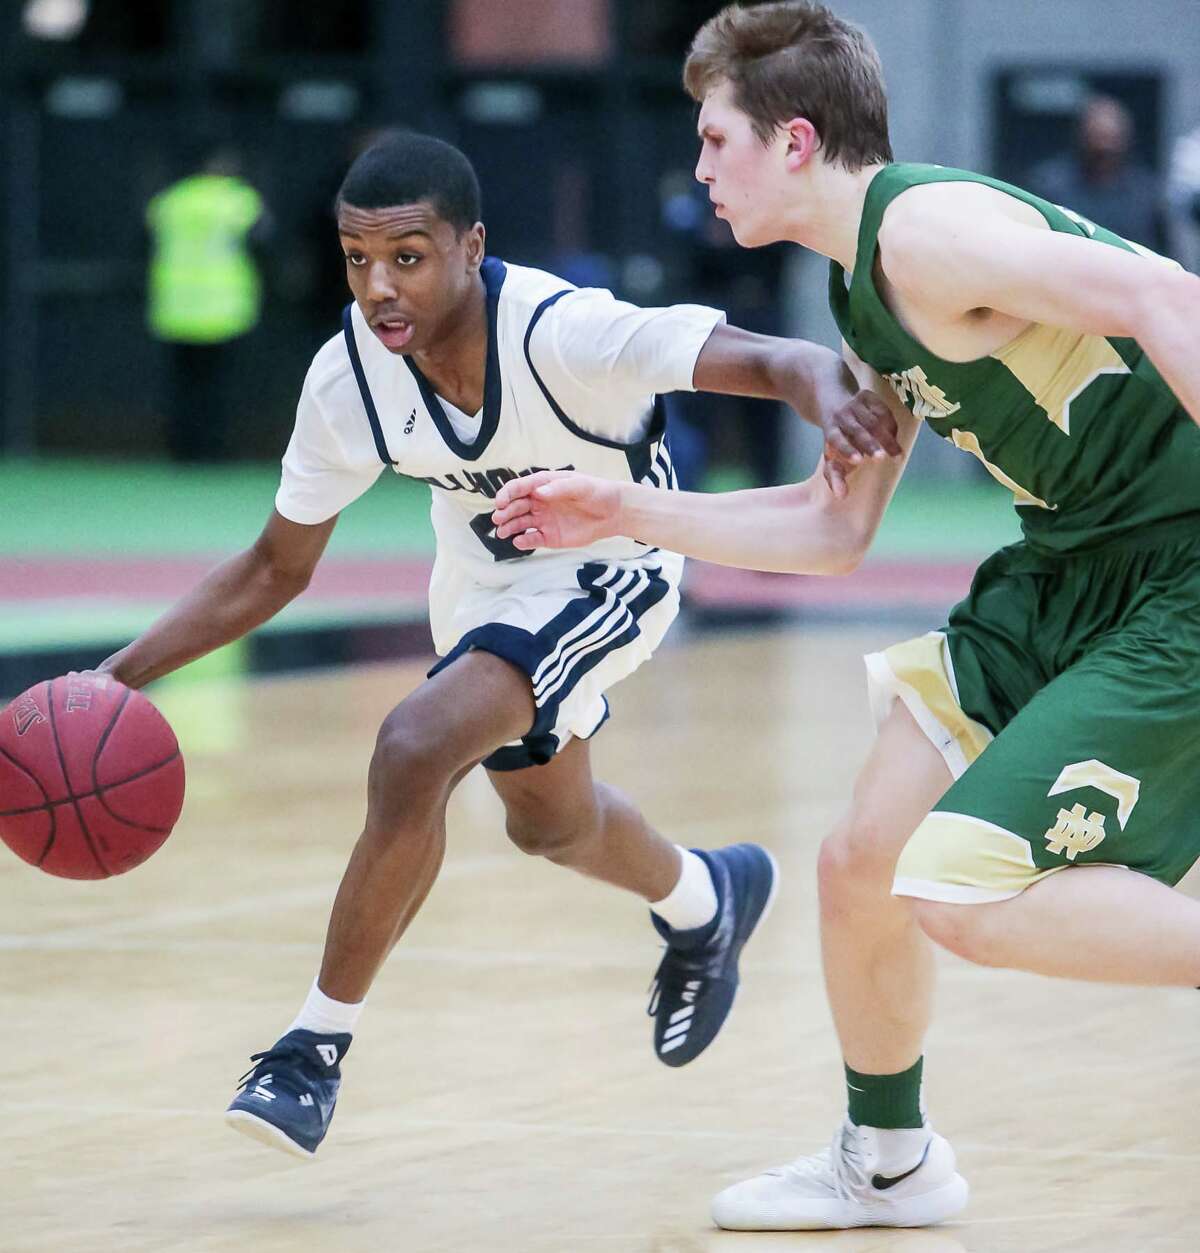 (John Vanacore/For Hearst Connecticut Media) Action from Game two of the SCC Semifinal featuring the Green Knights of Notre Dame of West Haven vs The Academics from Hillhouse. Action was at the Floyd Little Athletic Complex in New Haven Monday February 26, 2017.